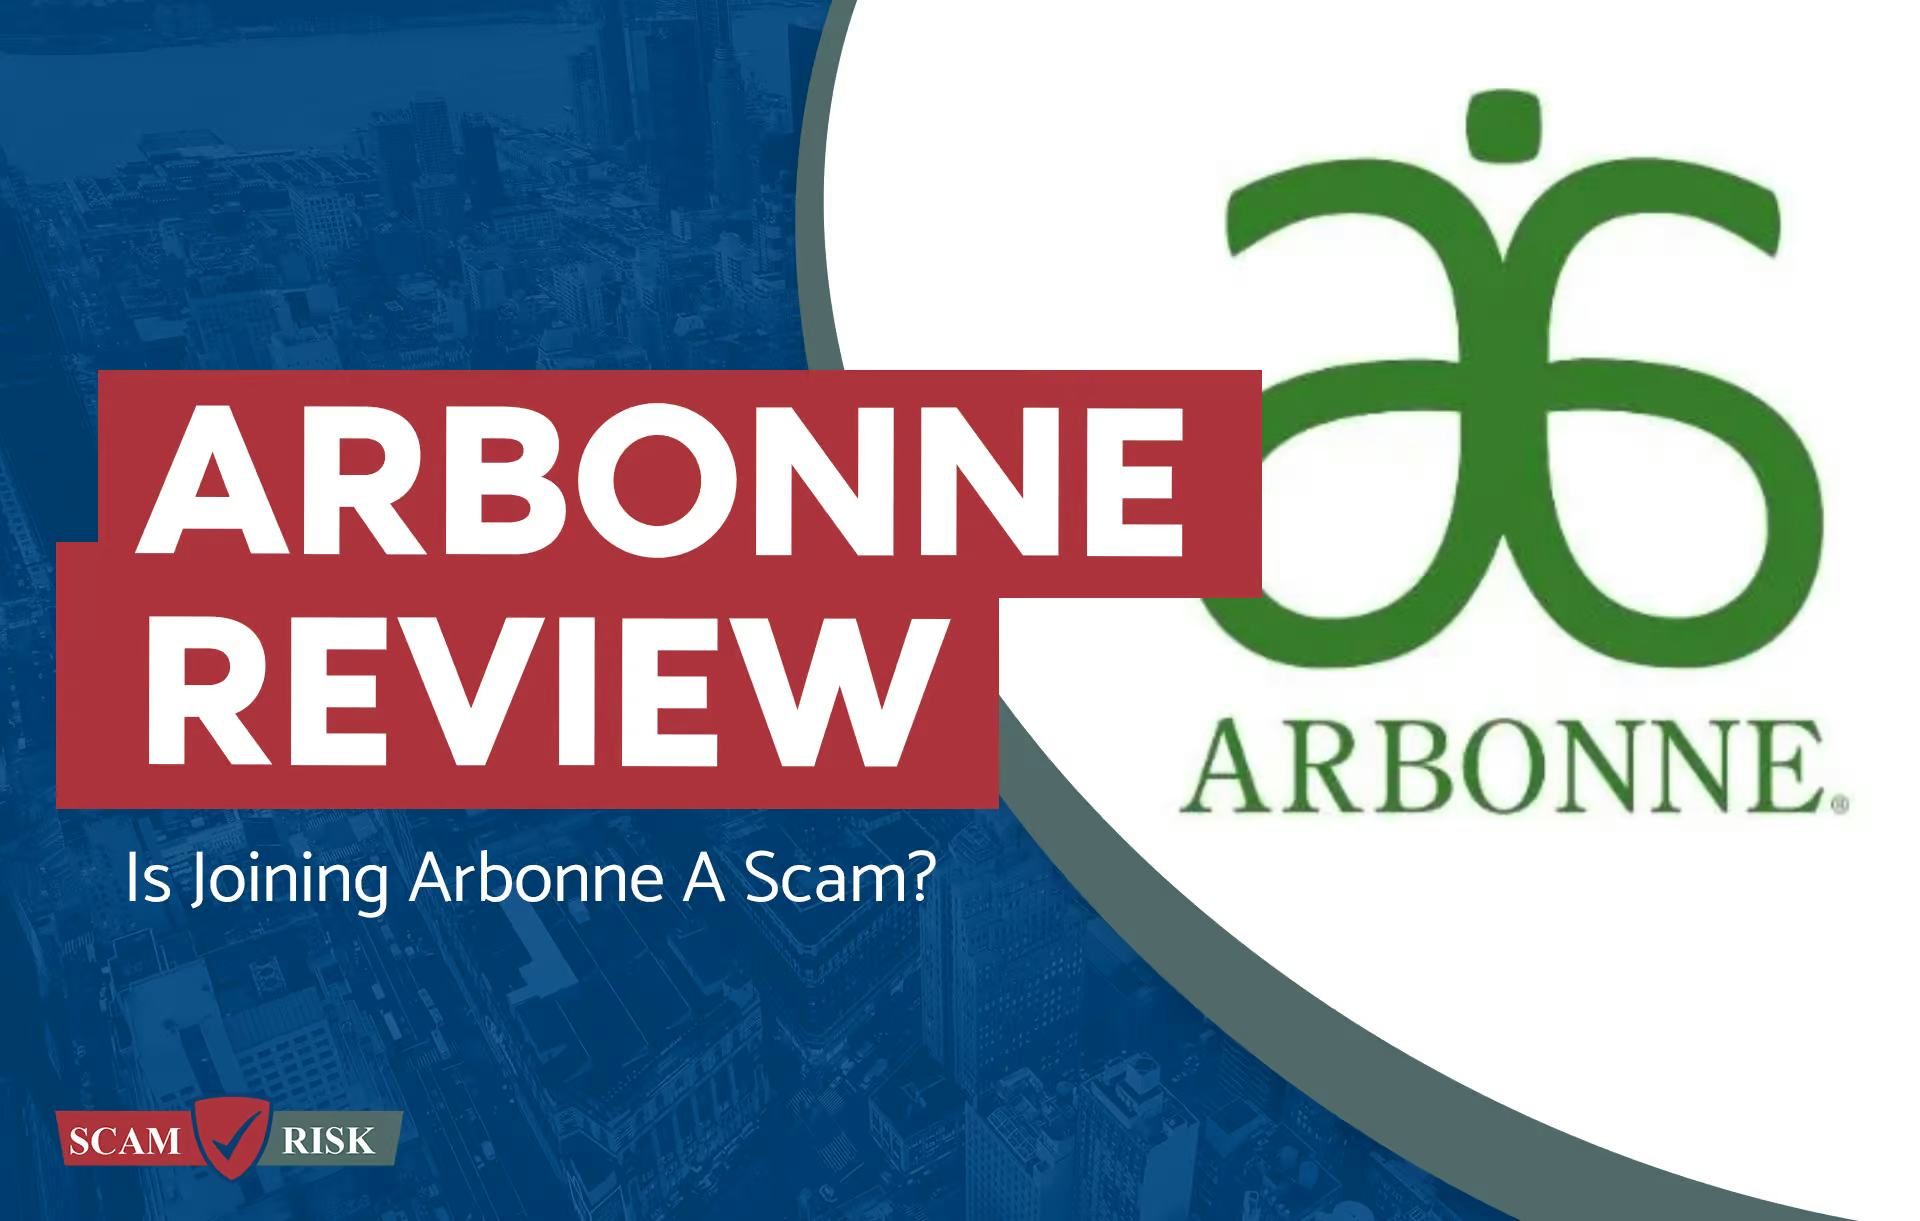 Arbonne Review: Is Joining Arbonne Scam?